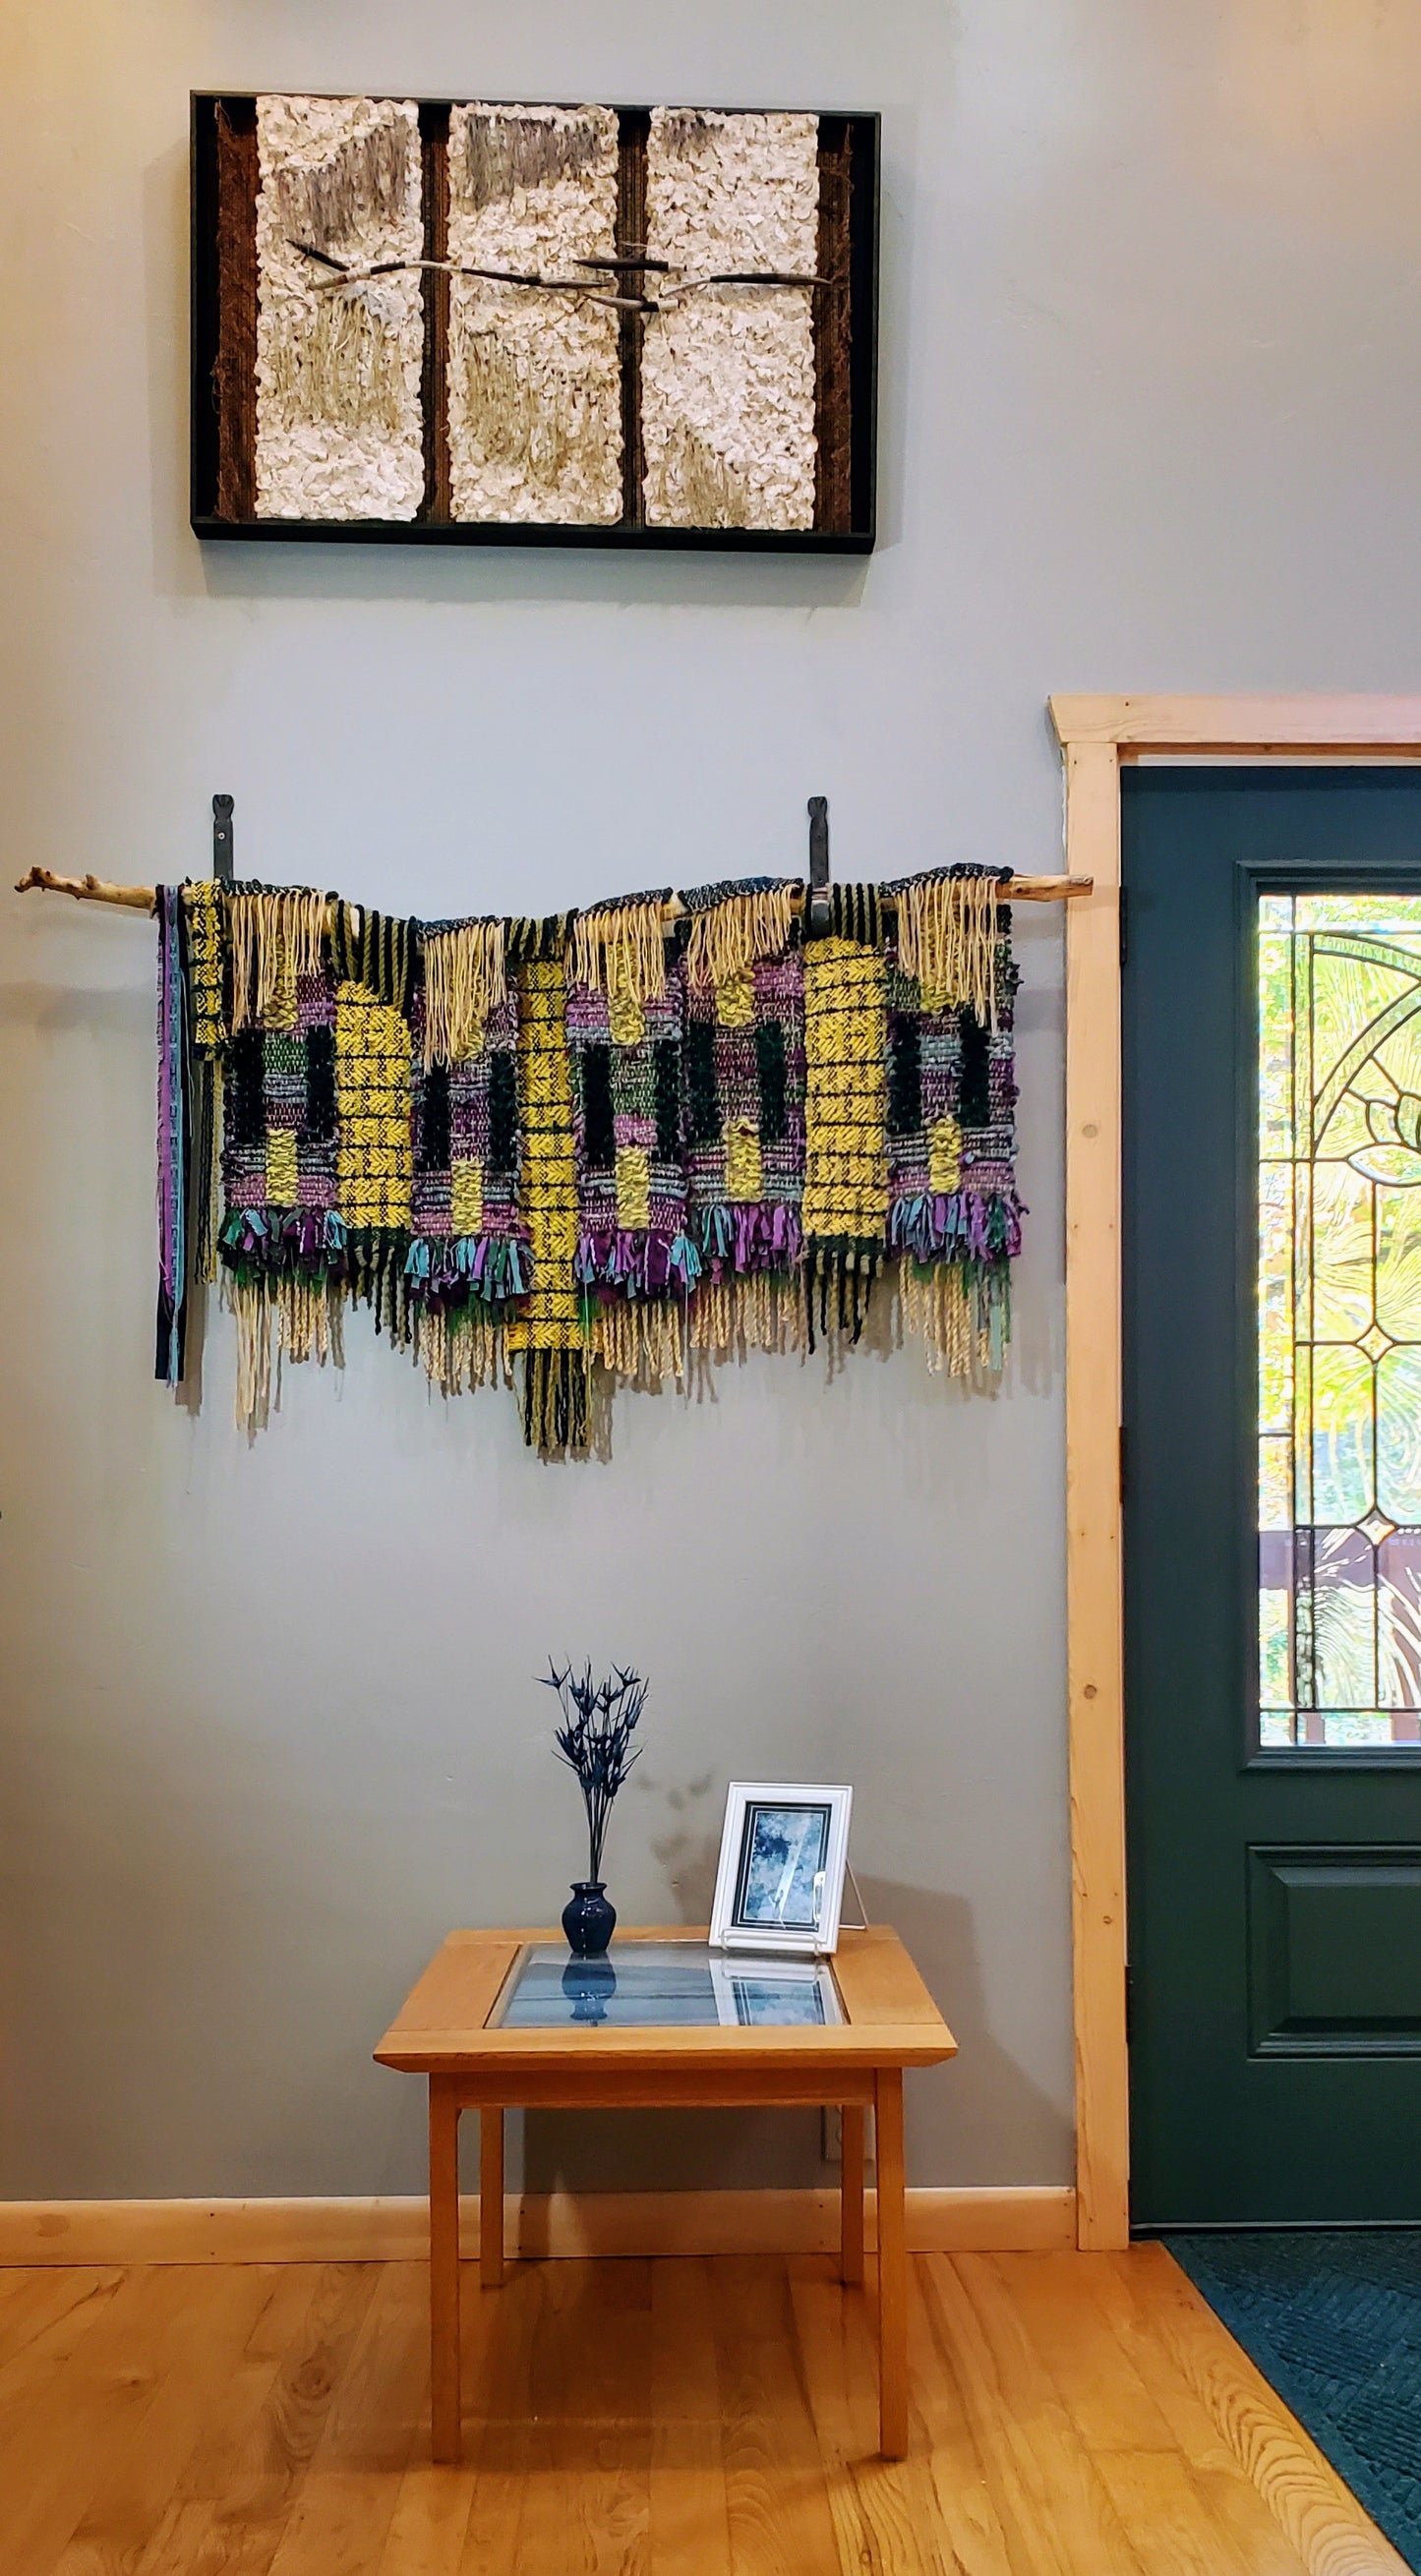 Fiber Art Sculpture | SOLD | Commission Work Available |Art Galleries in Door County | Commissioned Artwork Available